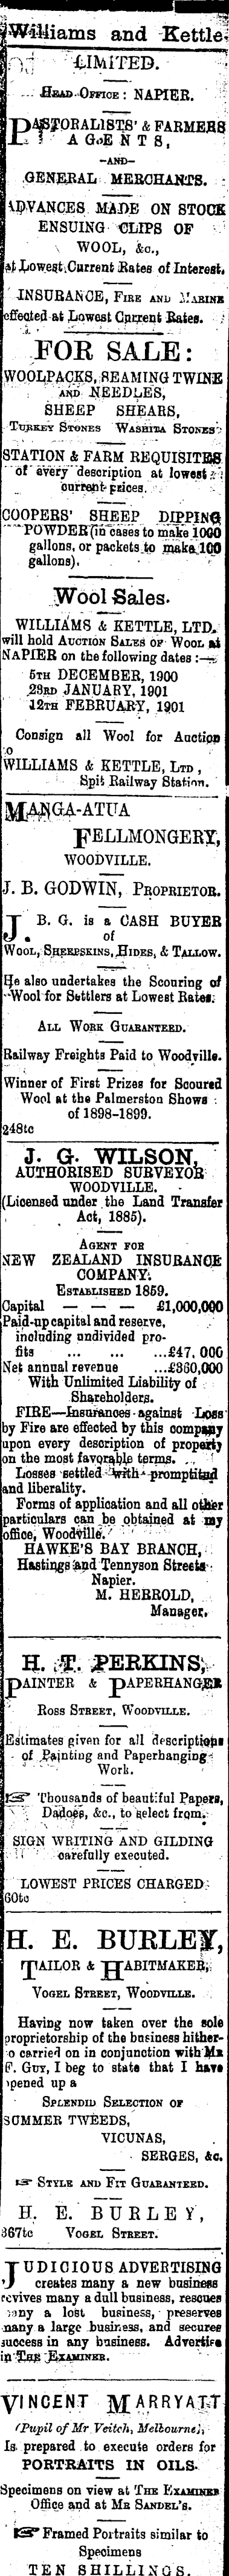 Papers Past Newspapers Woodville Examiner 23 January 1901 Page 1 Advertisements Column 6